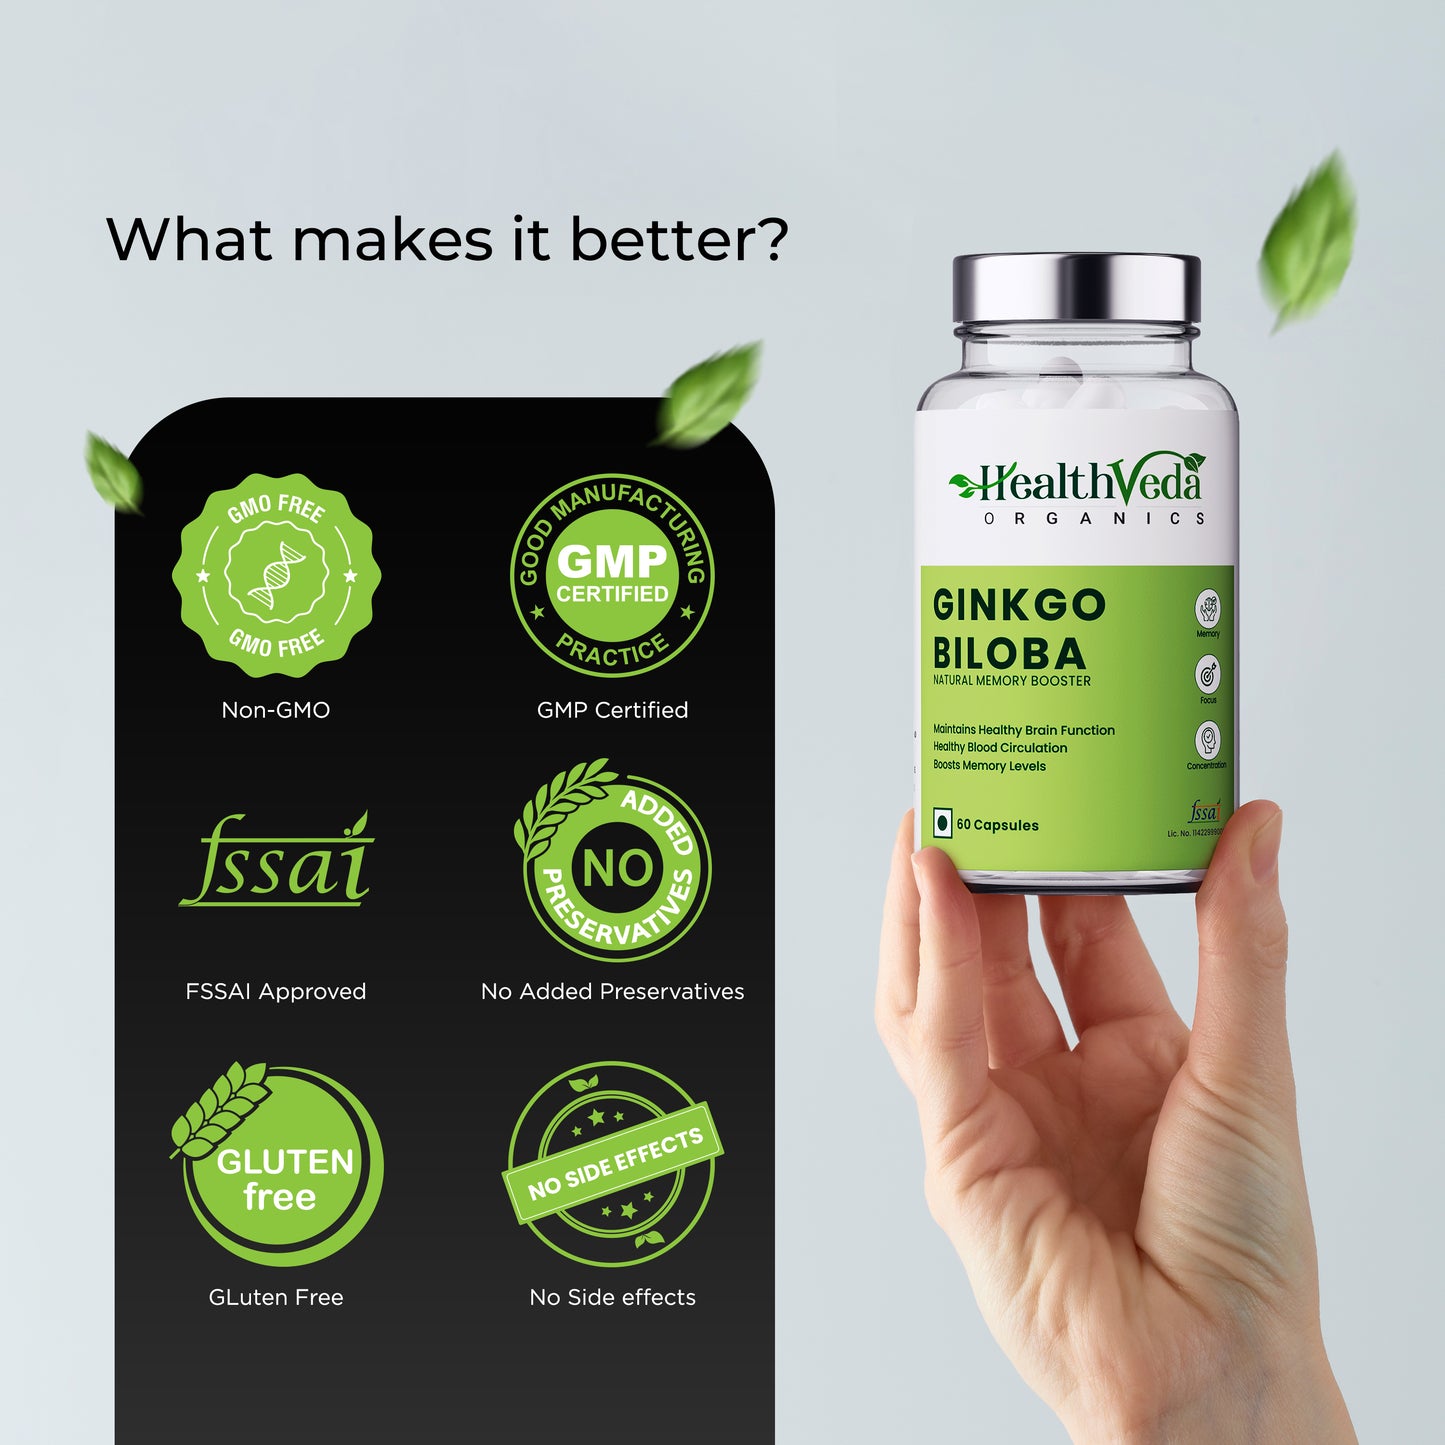 Health Veda Organics Ginkgo Biloba 120 mg Capsules I For Better Concentration, Memory & Learning - 60 Veg Capsules